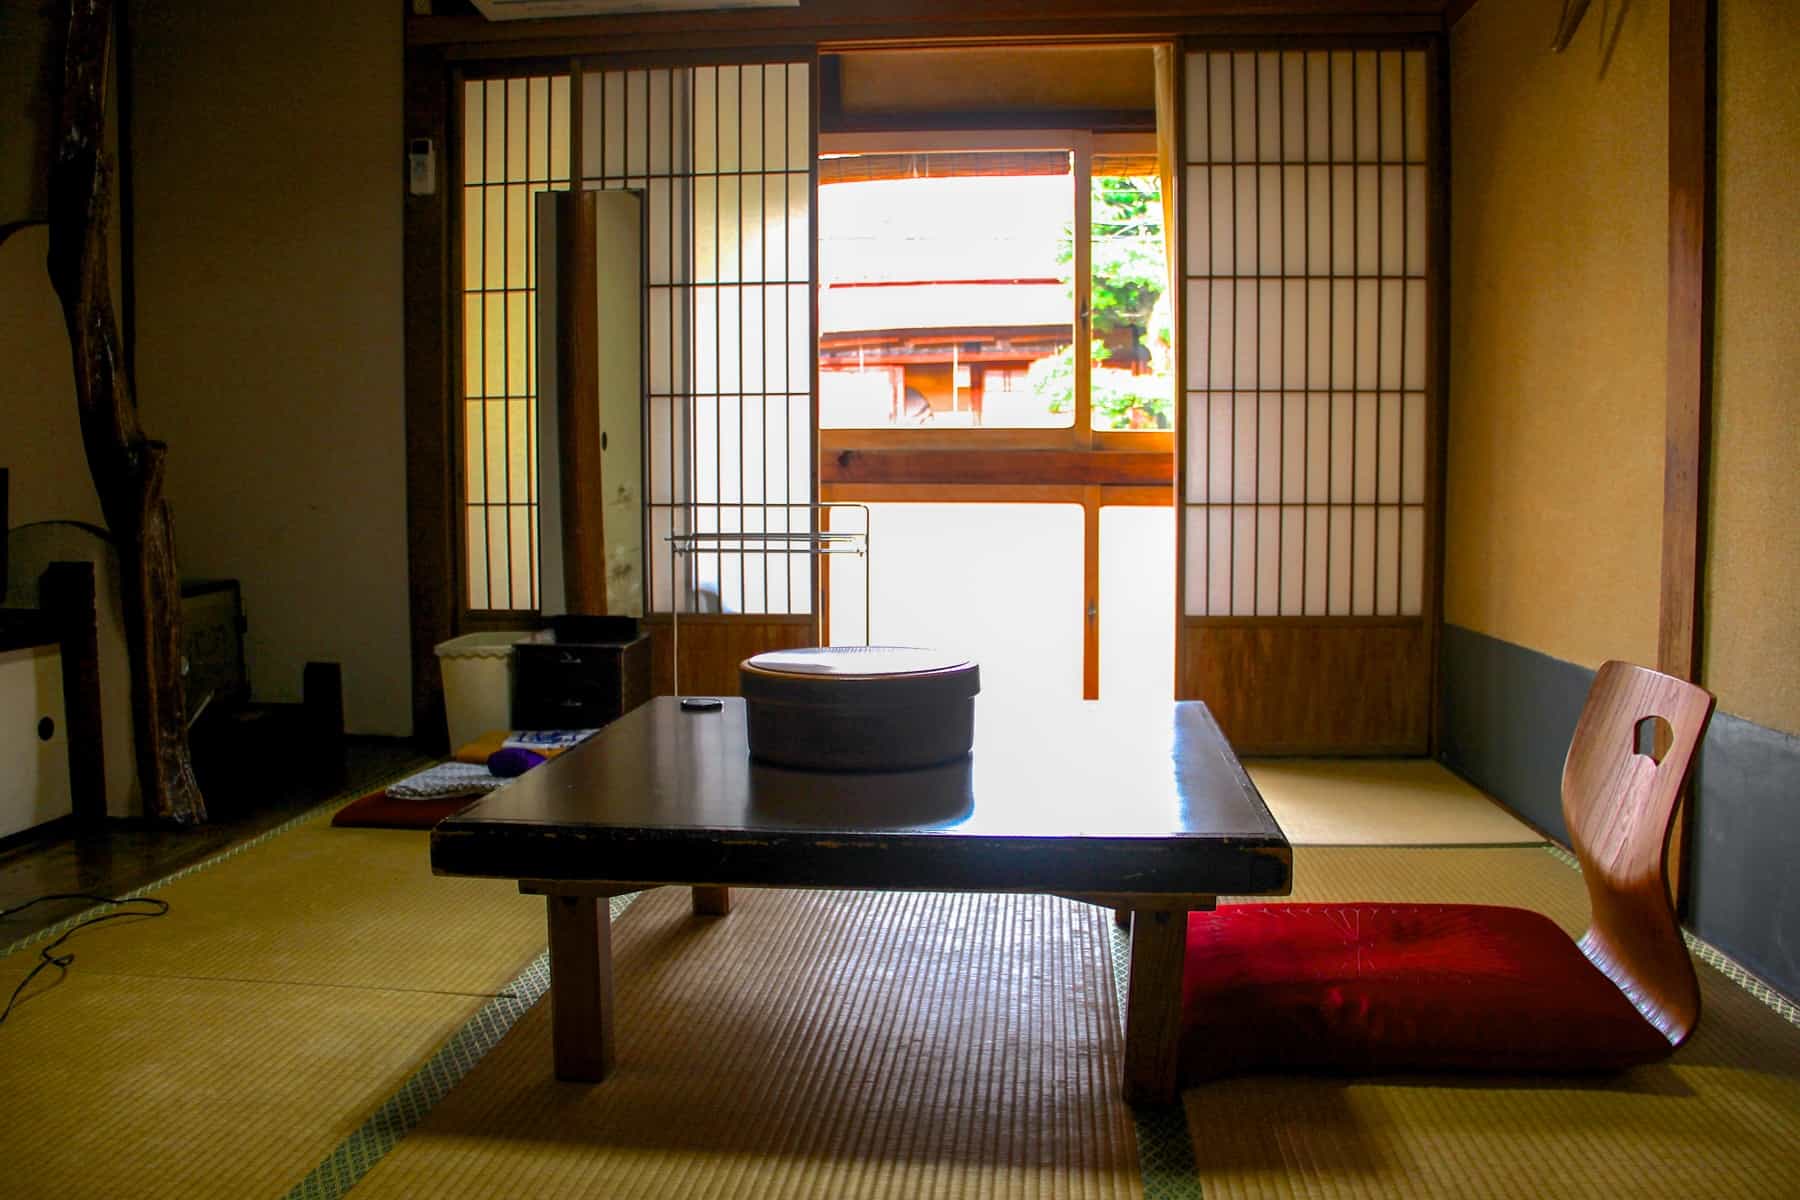 A room in a traditional Japanese Ryokan with wooden sliding doors, a wooden, floor chair and reed mat.